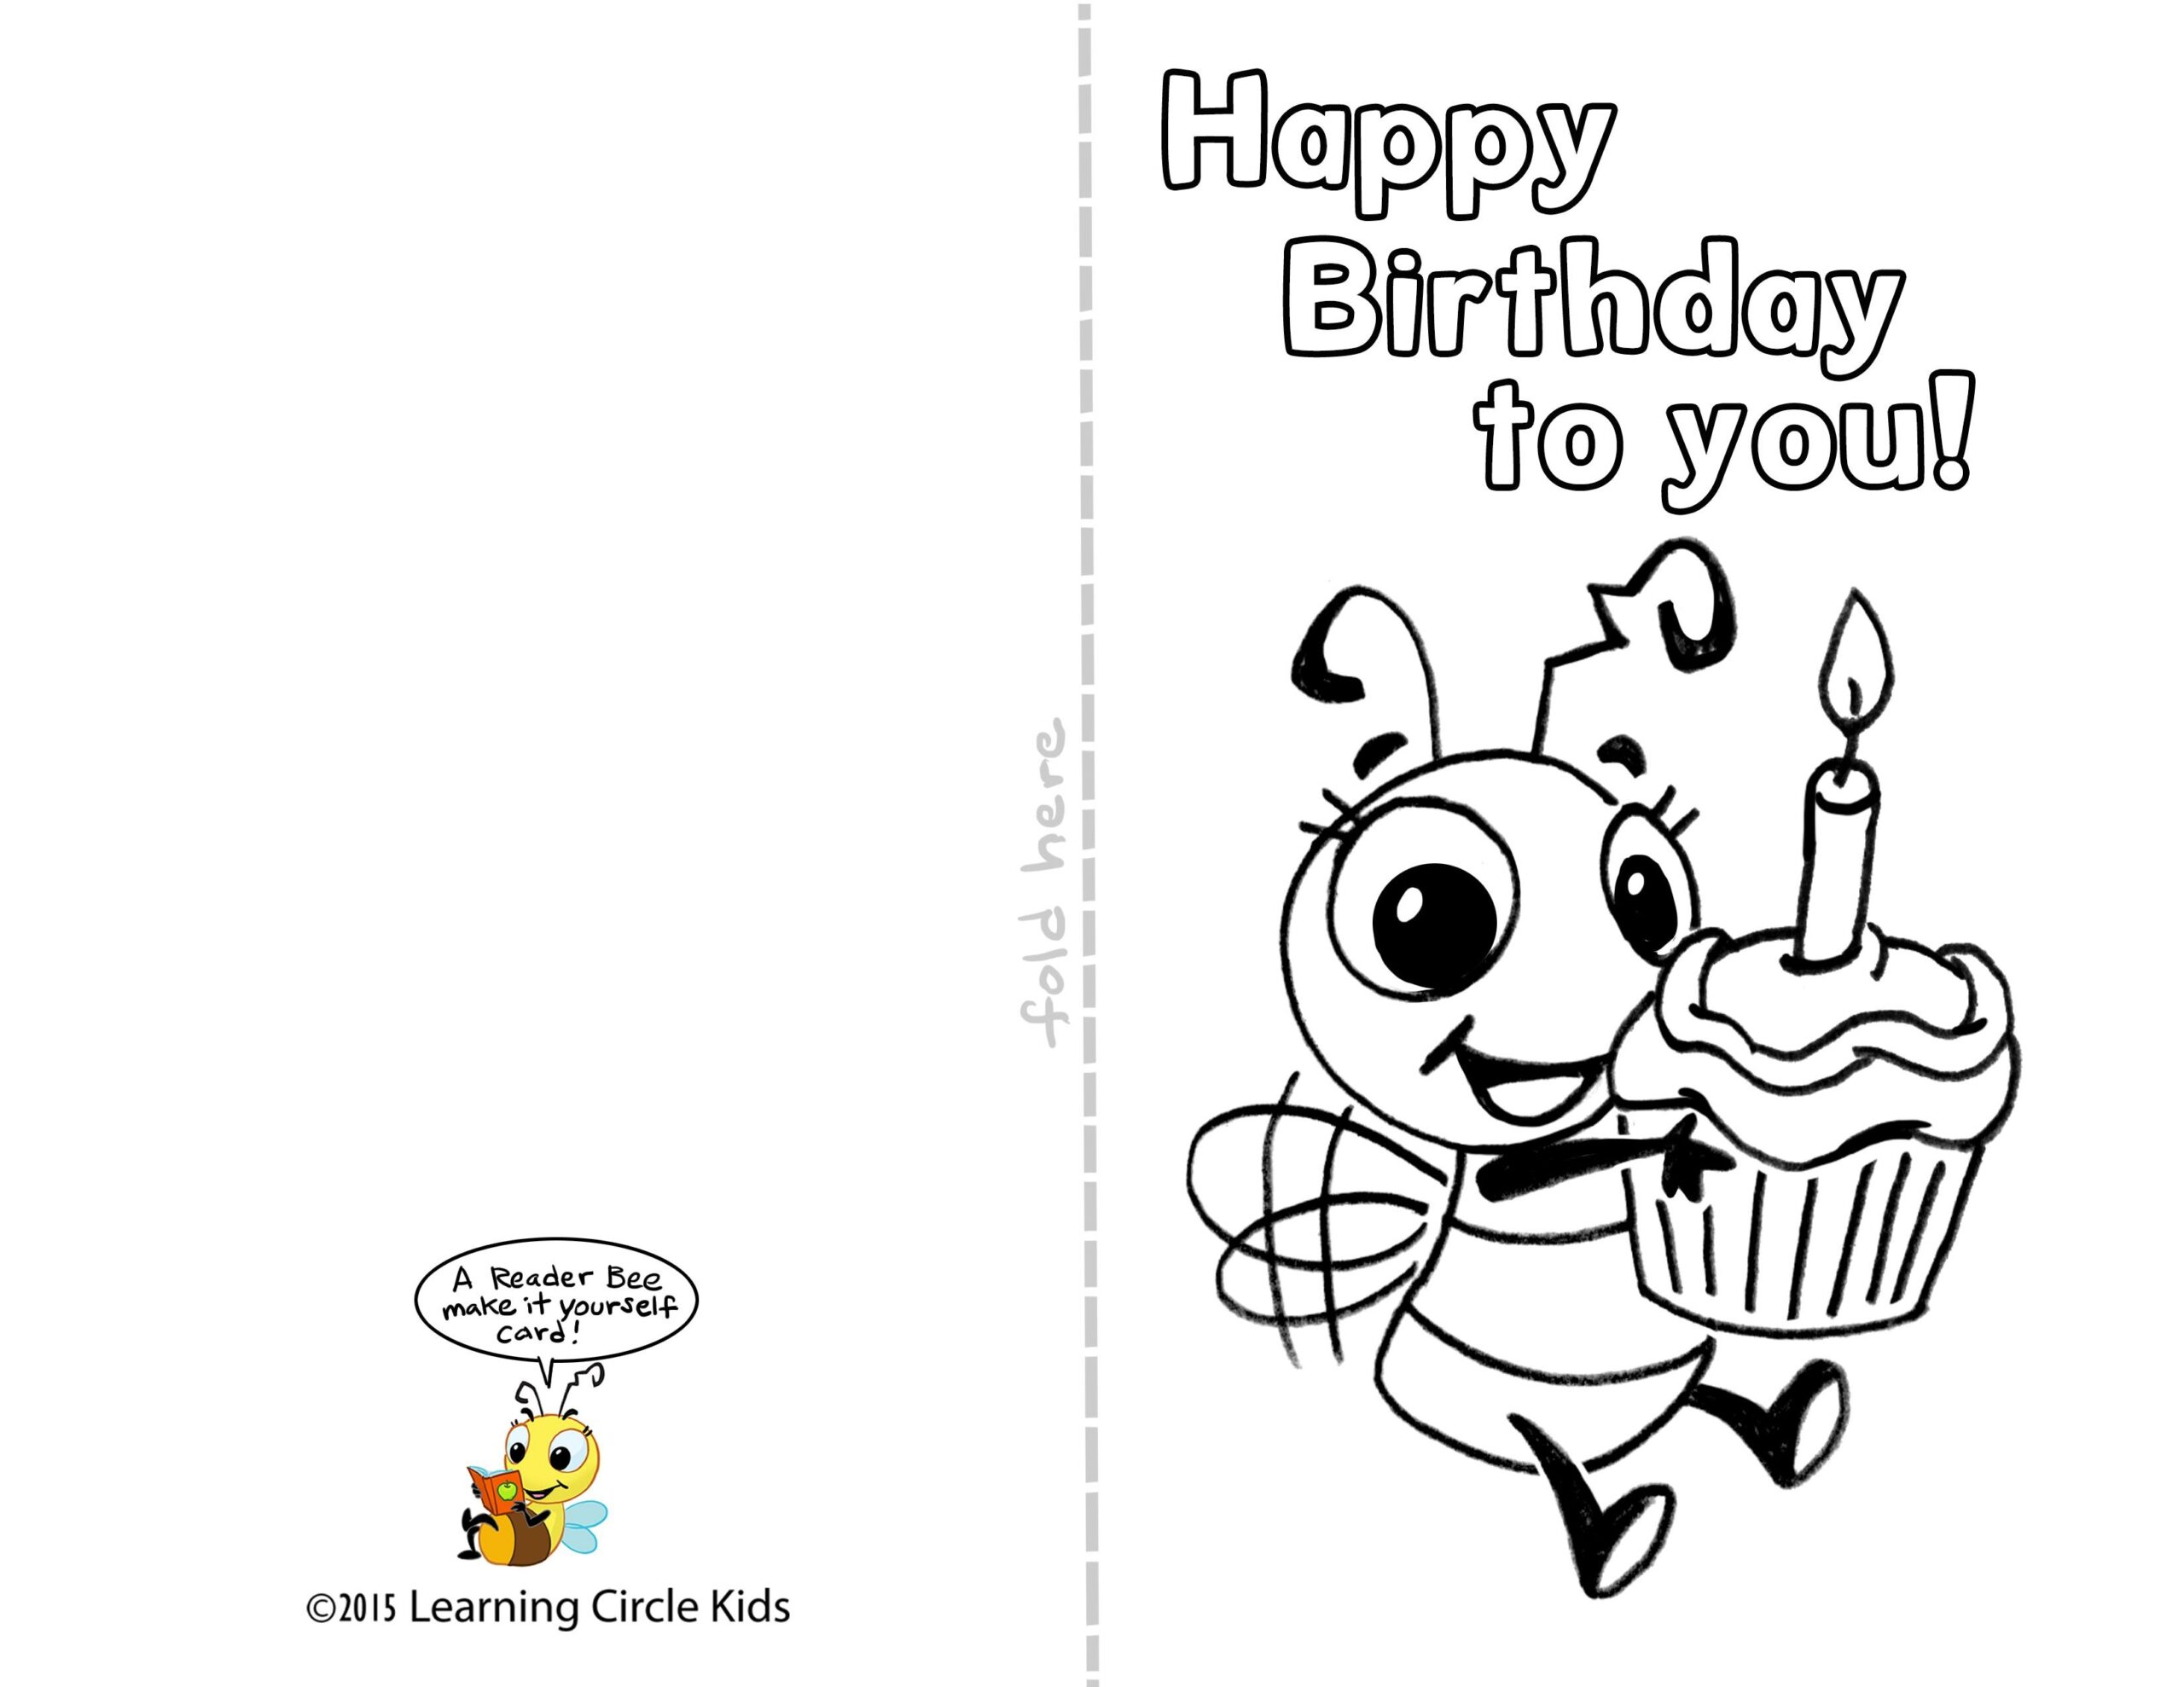 DIY Free Printable Birthday Card For Kids To Decorate And Write Their Own Coloring Birthday Cards Free Printable Birthday Cards Happy Birthday Cards Printable - Free Printable Birthday Cards To Color